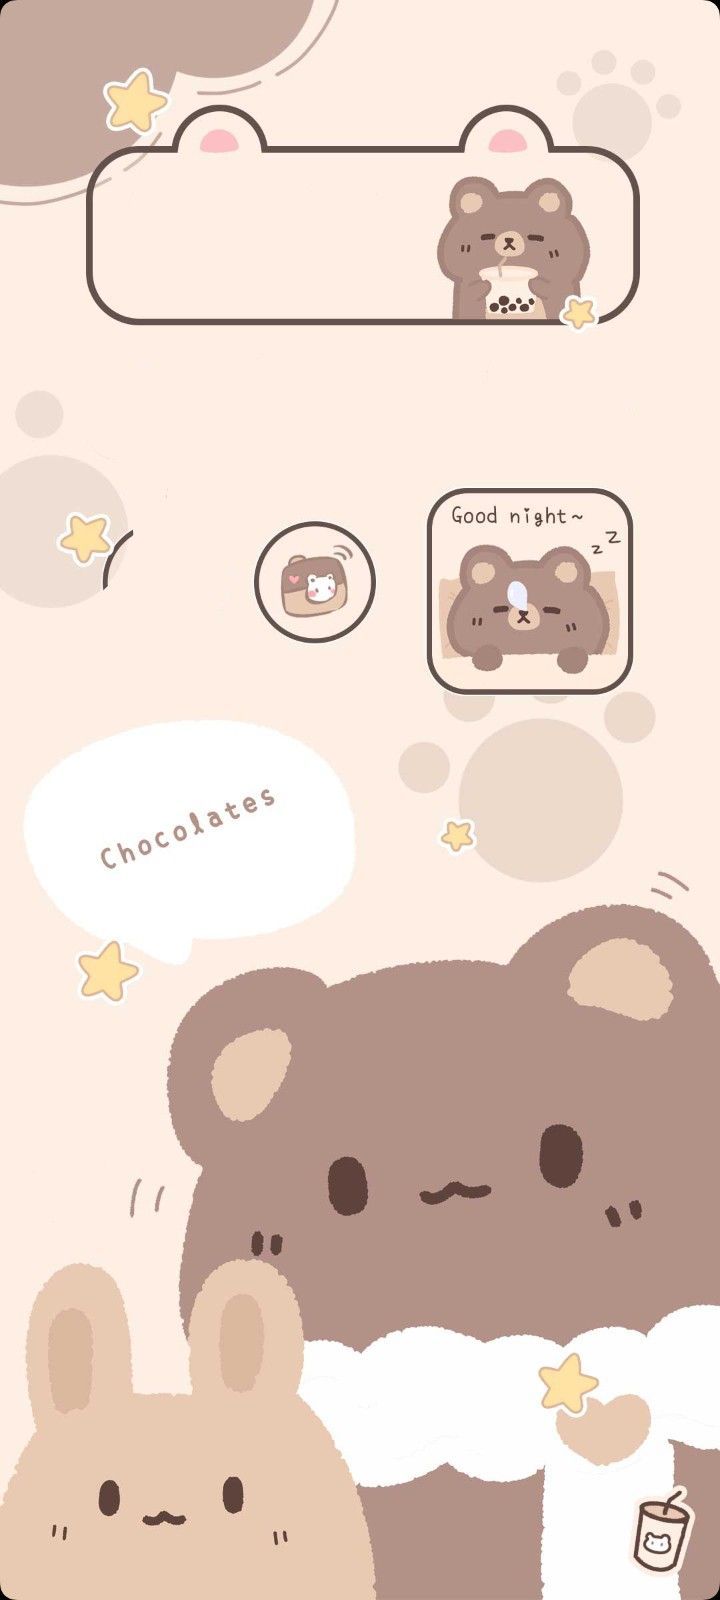 Cute Kawaii Wallpapers for iPhone - The Mood Guide